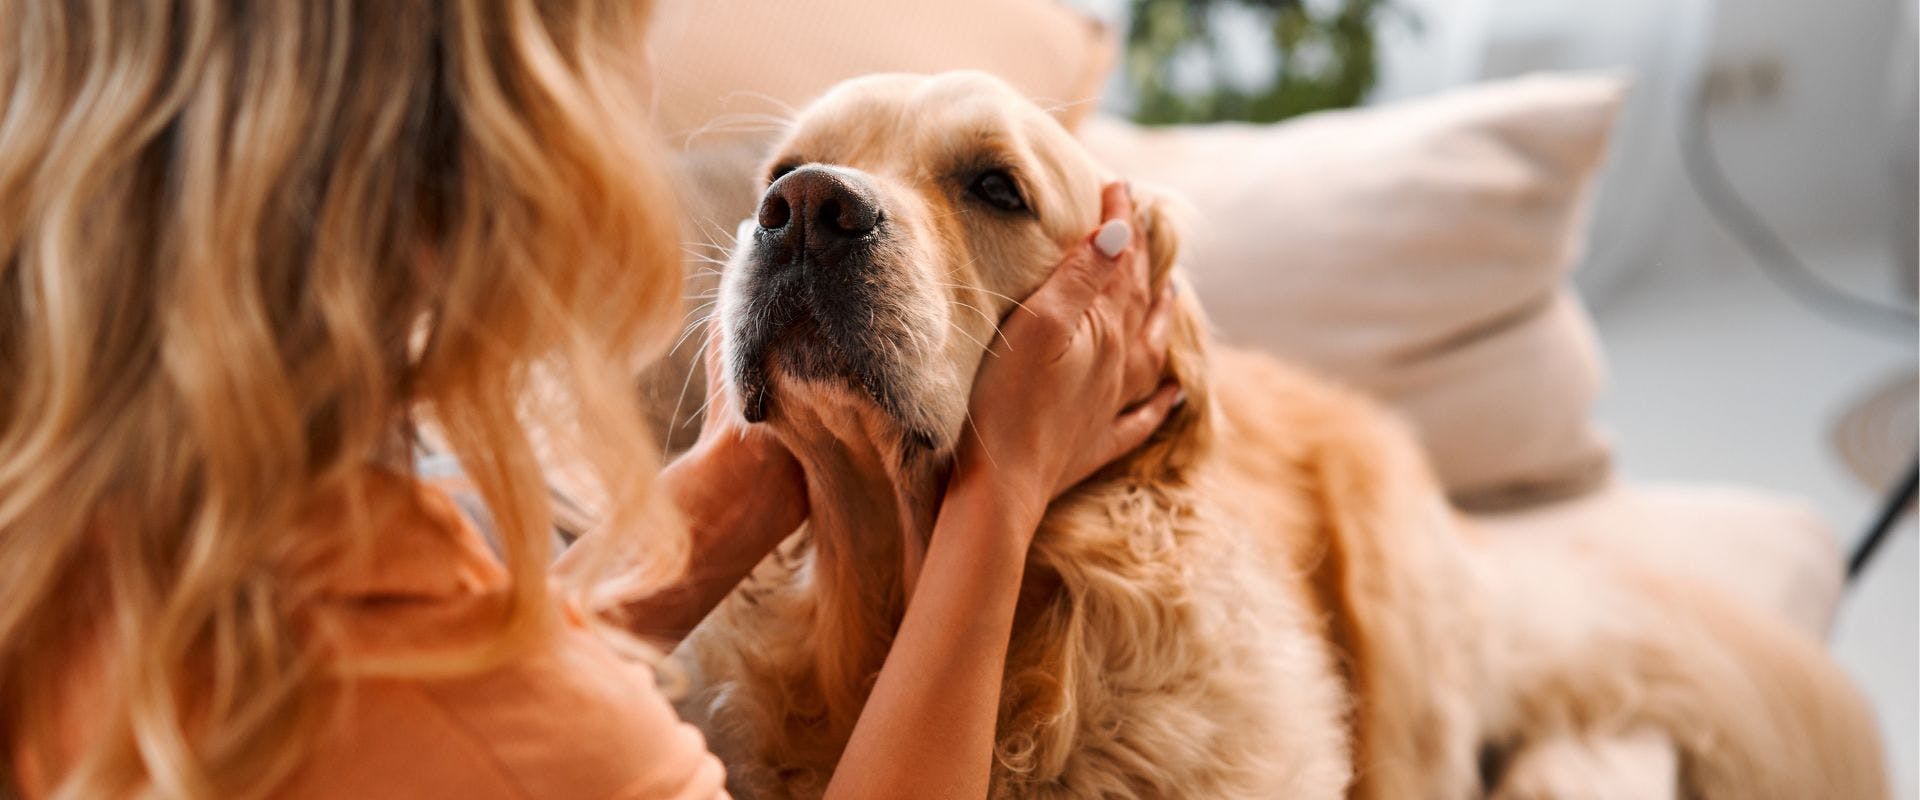 Golden Retriever being stroked at home